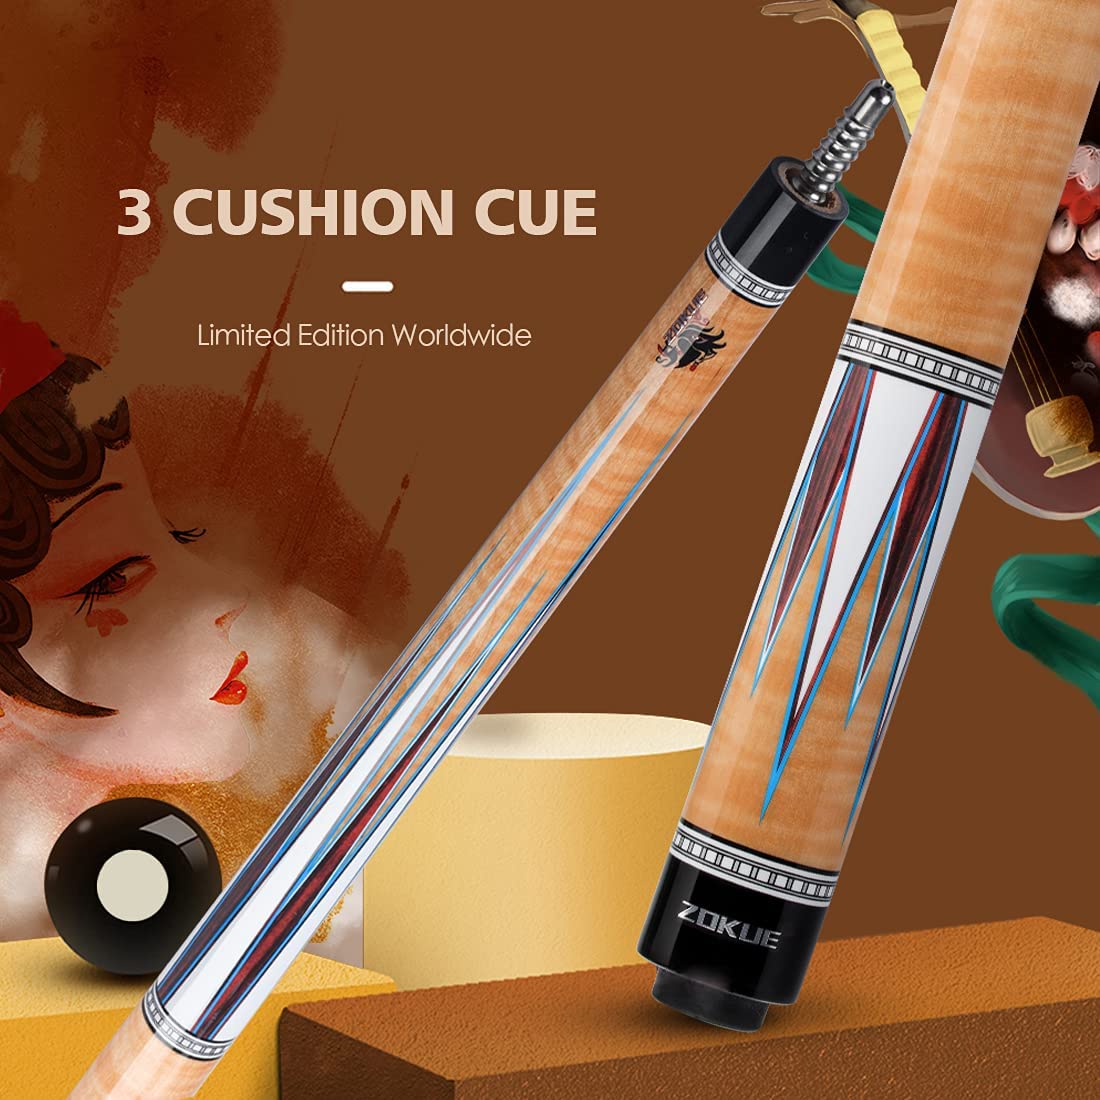 ZOKUE 3 Cushion Carom Cue Stick Billiard Cue Stick Kit with Case (142cm, 12mm Sea-Eye Tip, Radial Pin Joint, Adjustable Weight,